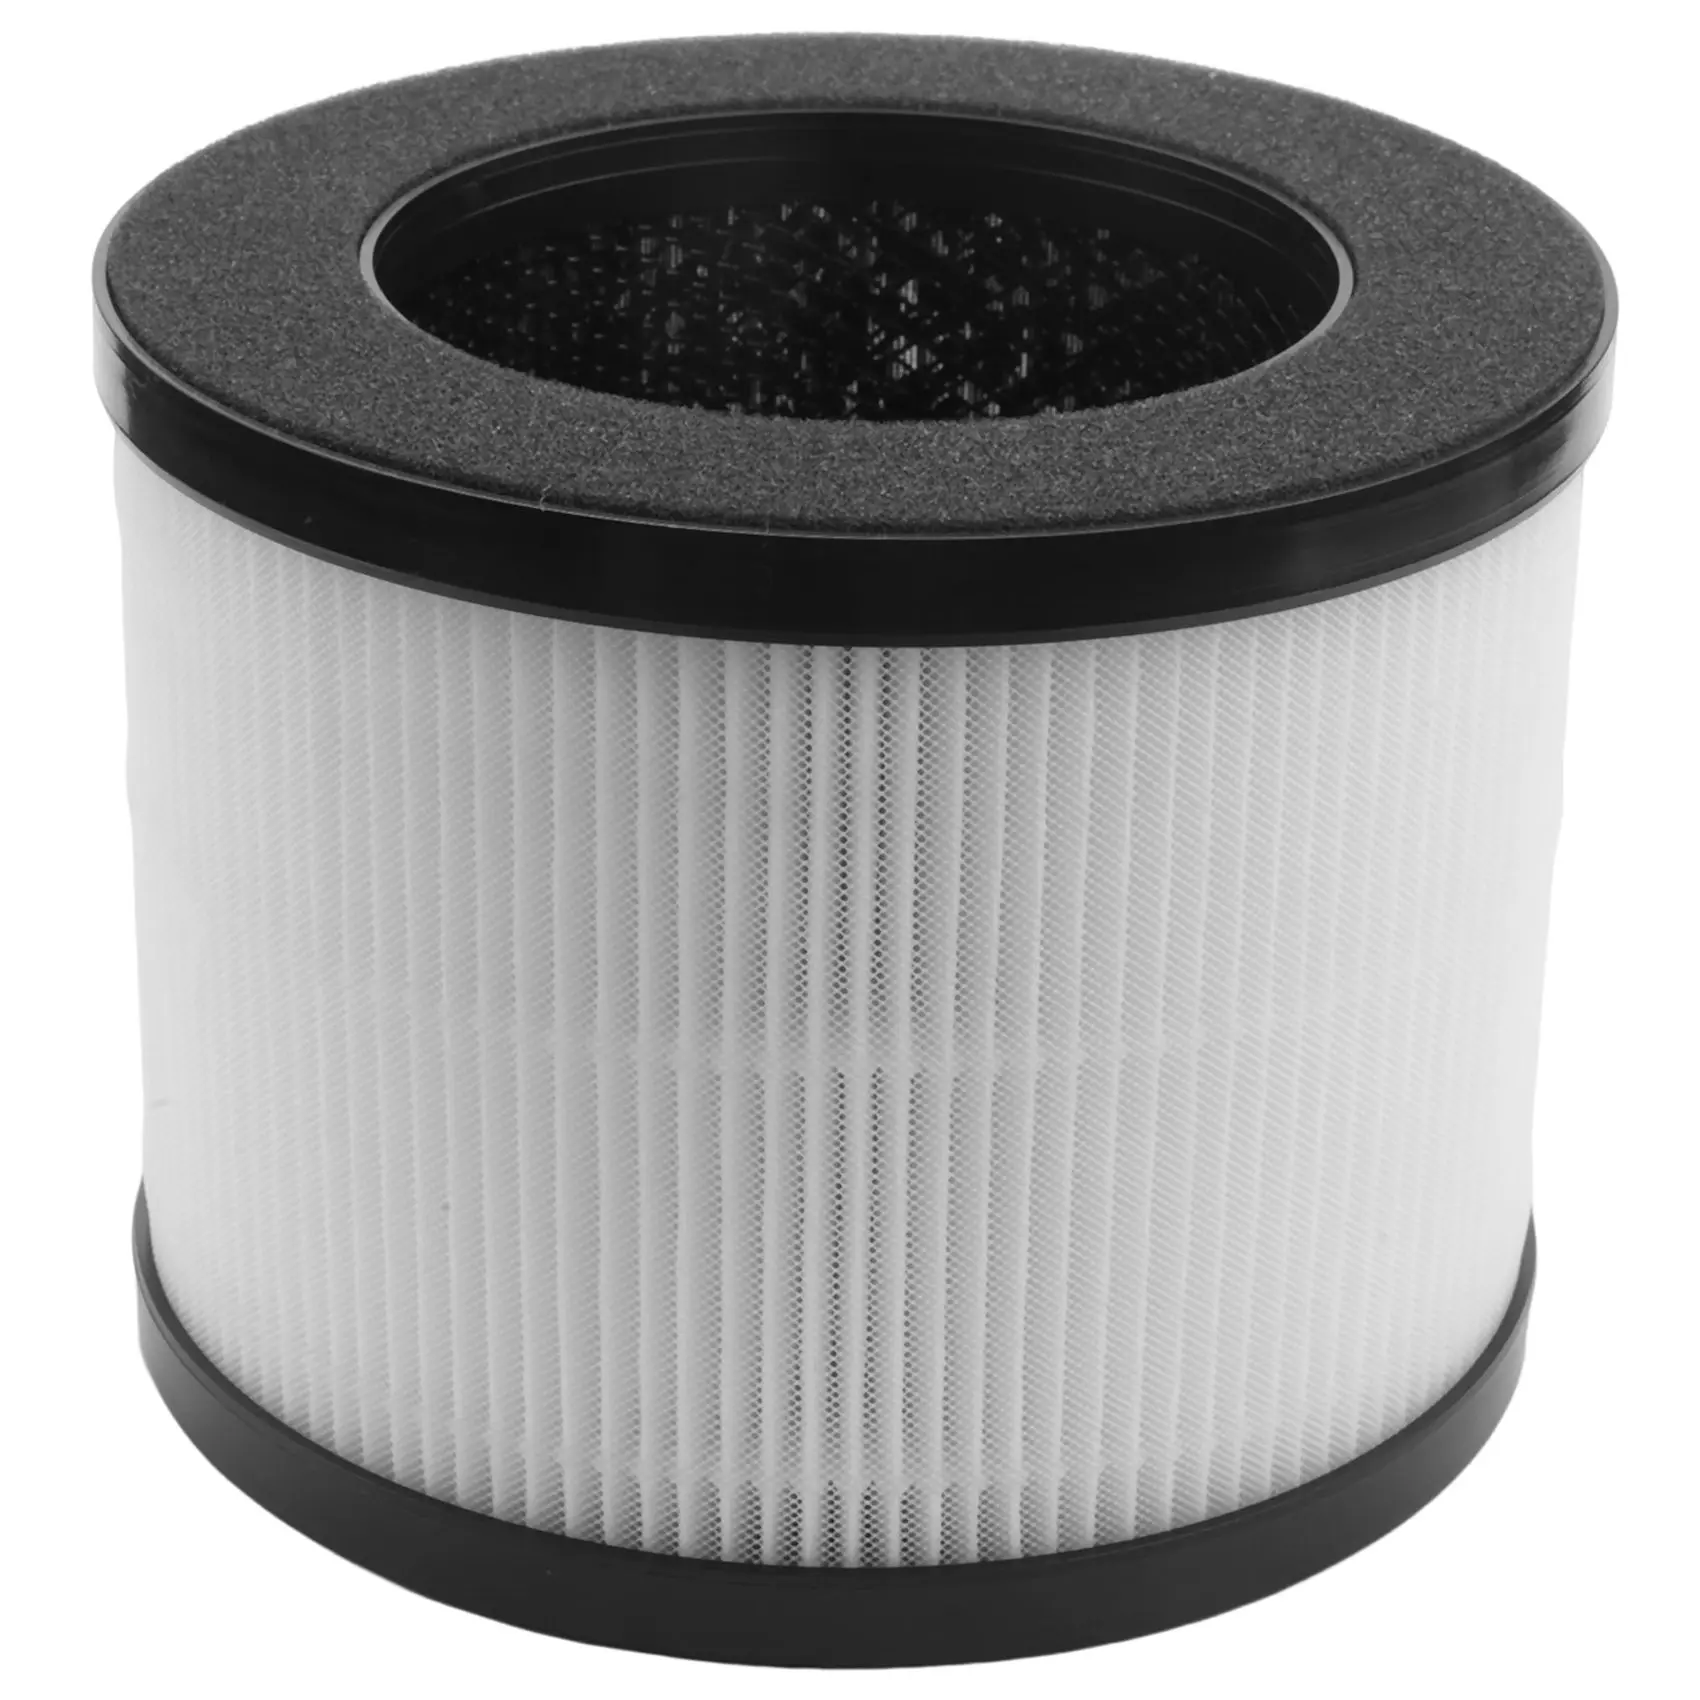 

3-In-1 HEPA Replacement Filter for Medify MA-18 Air Purifier and Miko Air Purifier,True HEPA and Activated Carbon Filter